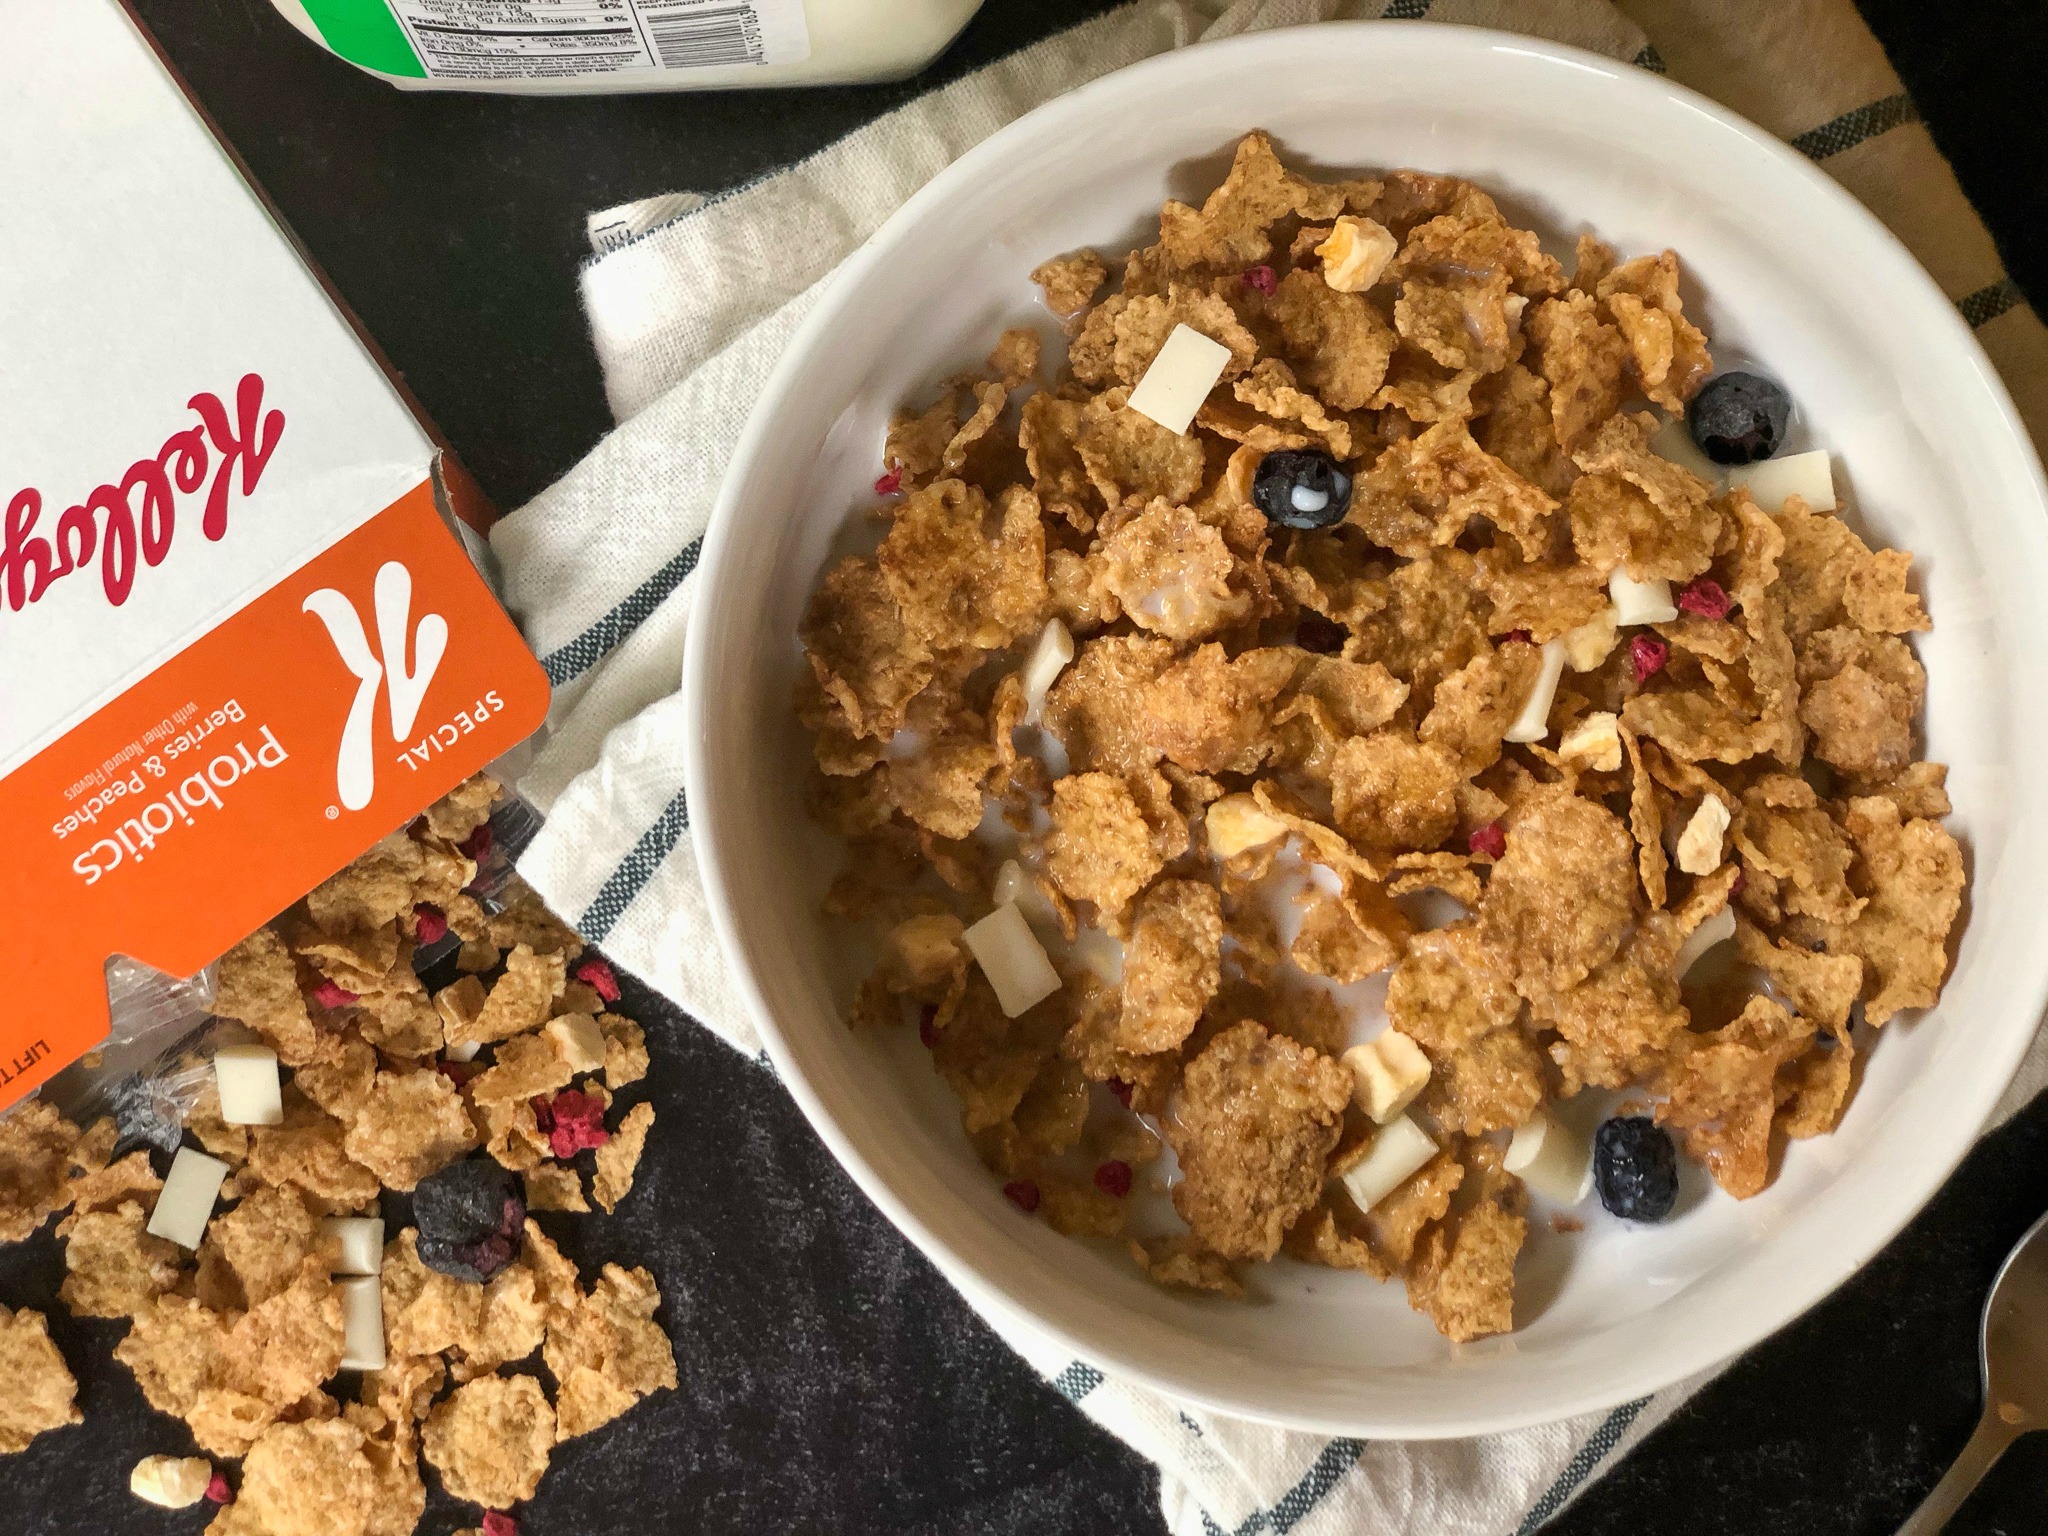 Get A Super Deal On Kellogg’s® Special K® Cereal & Be Sure To Sign Up For The Virtual MORE THAN PINK Walk on I Heart Publix